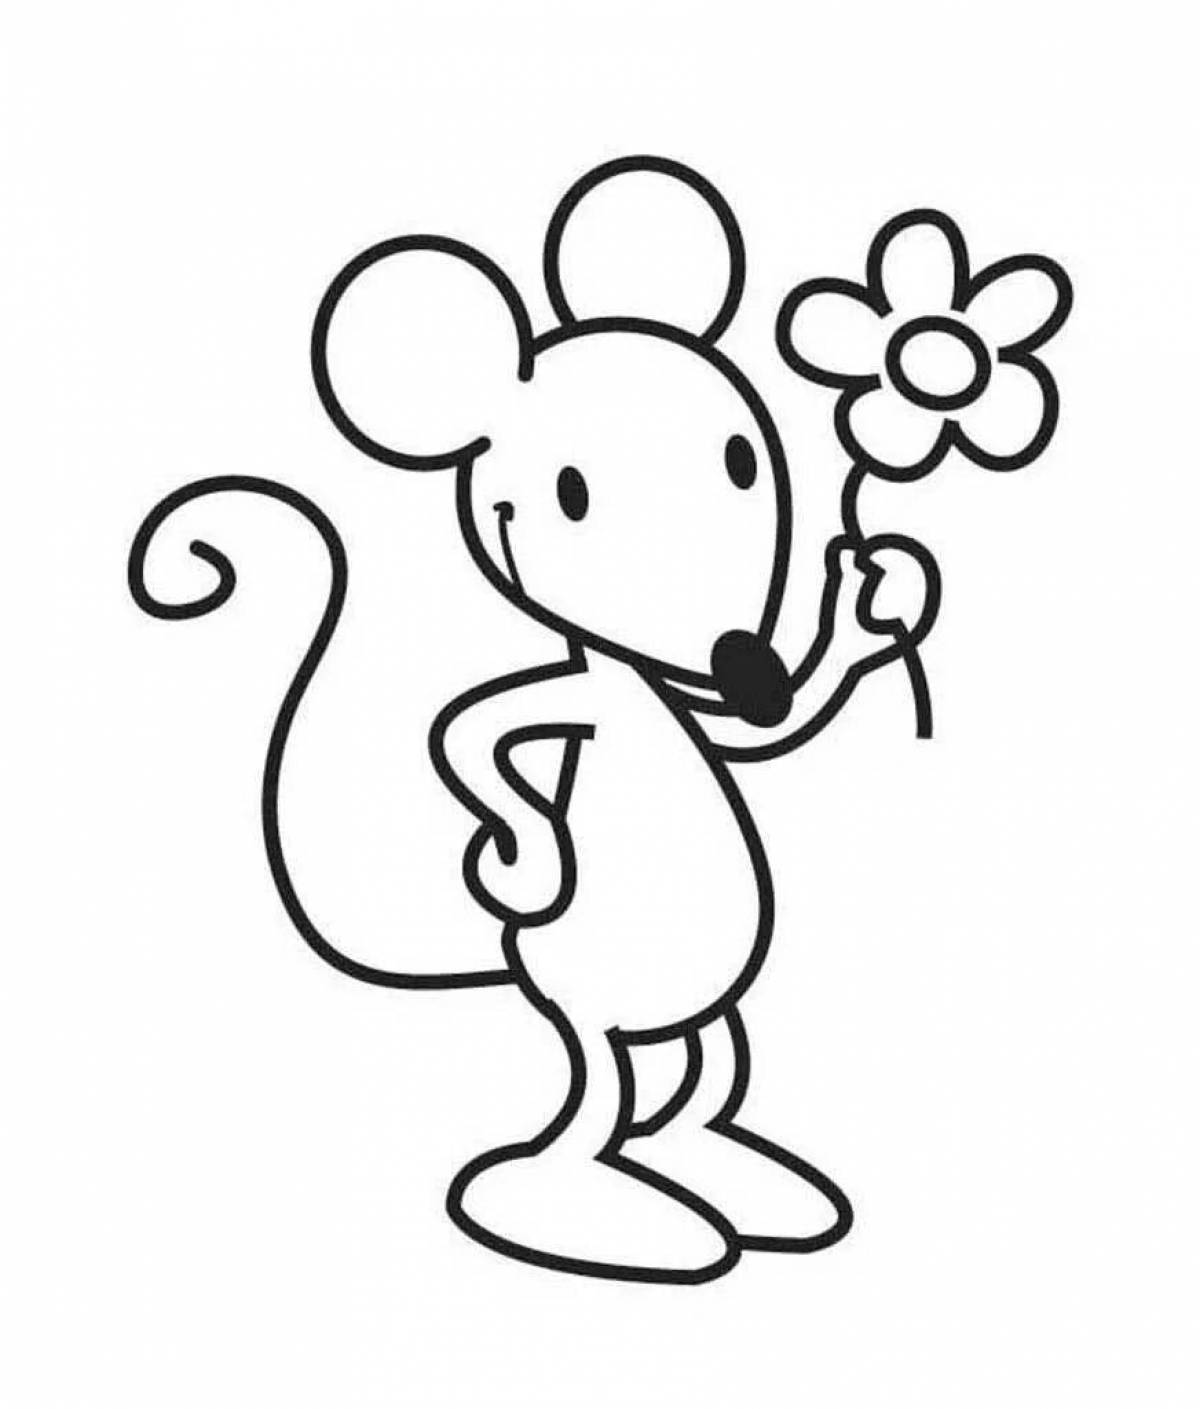 Colorful drawing of a mouse